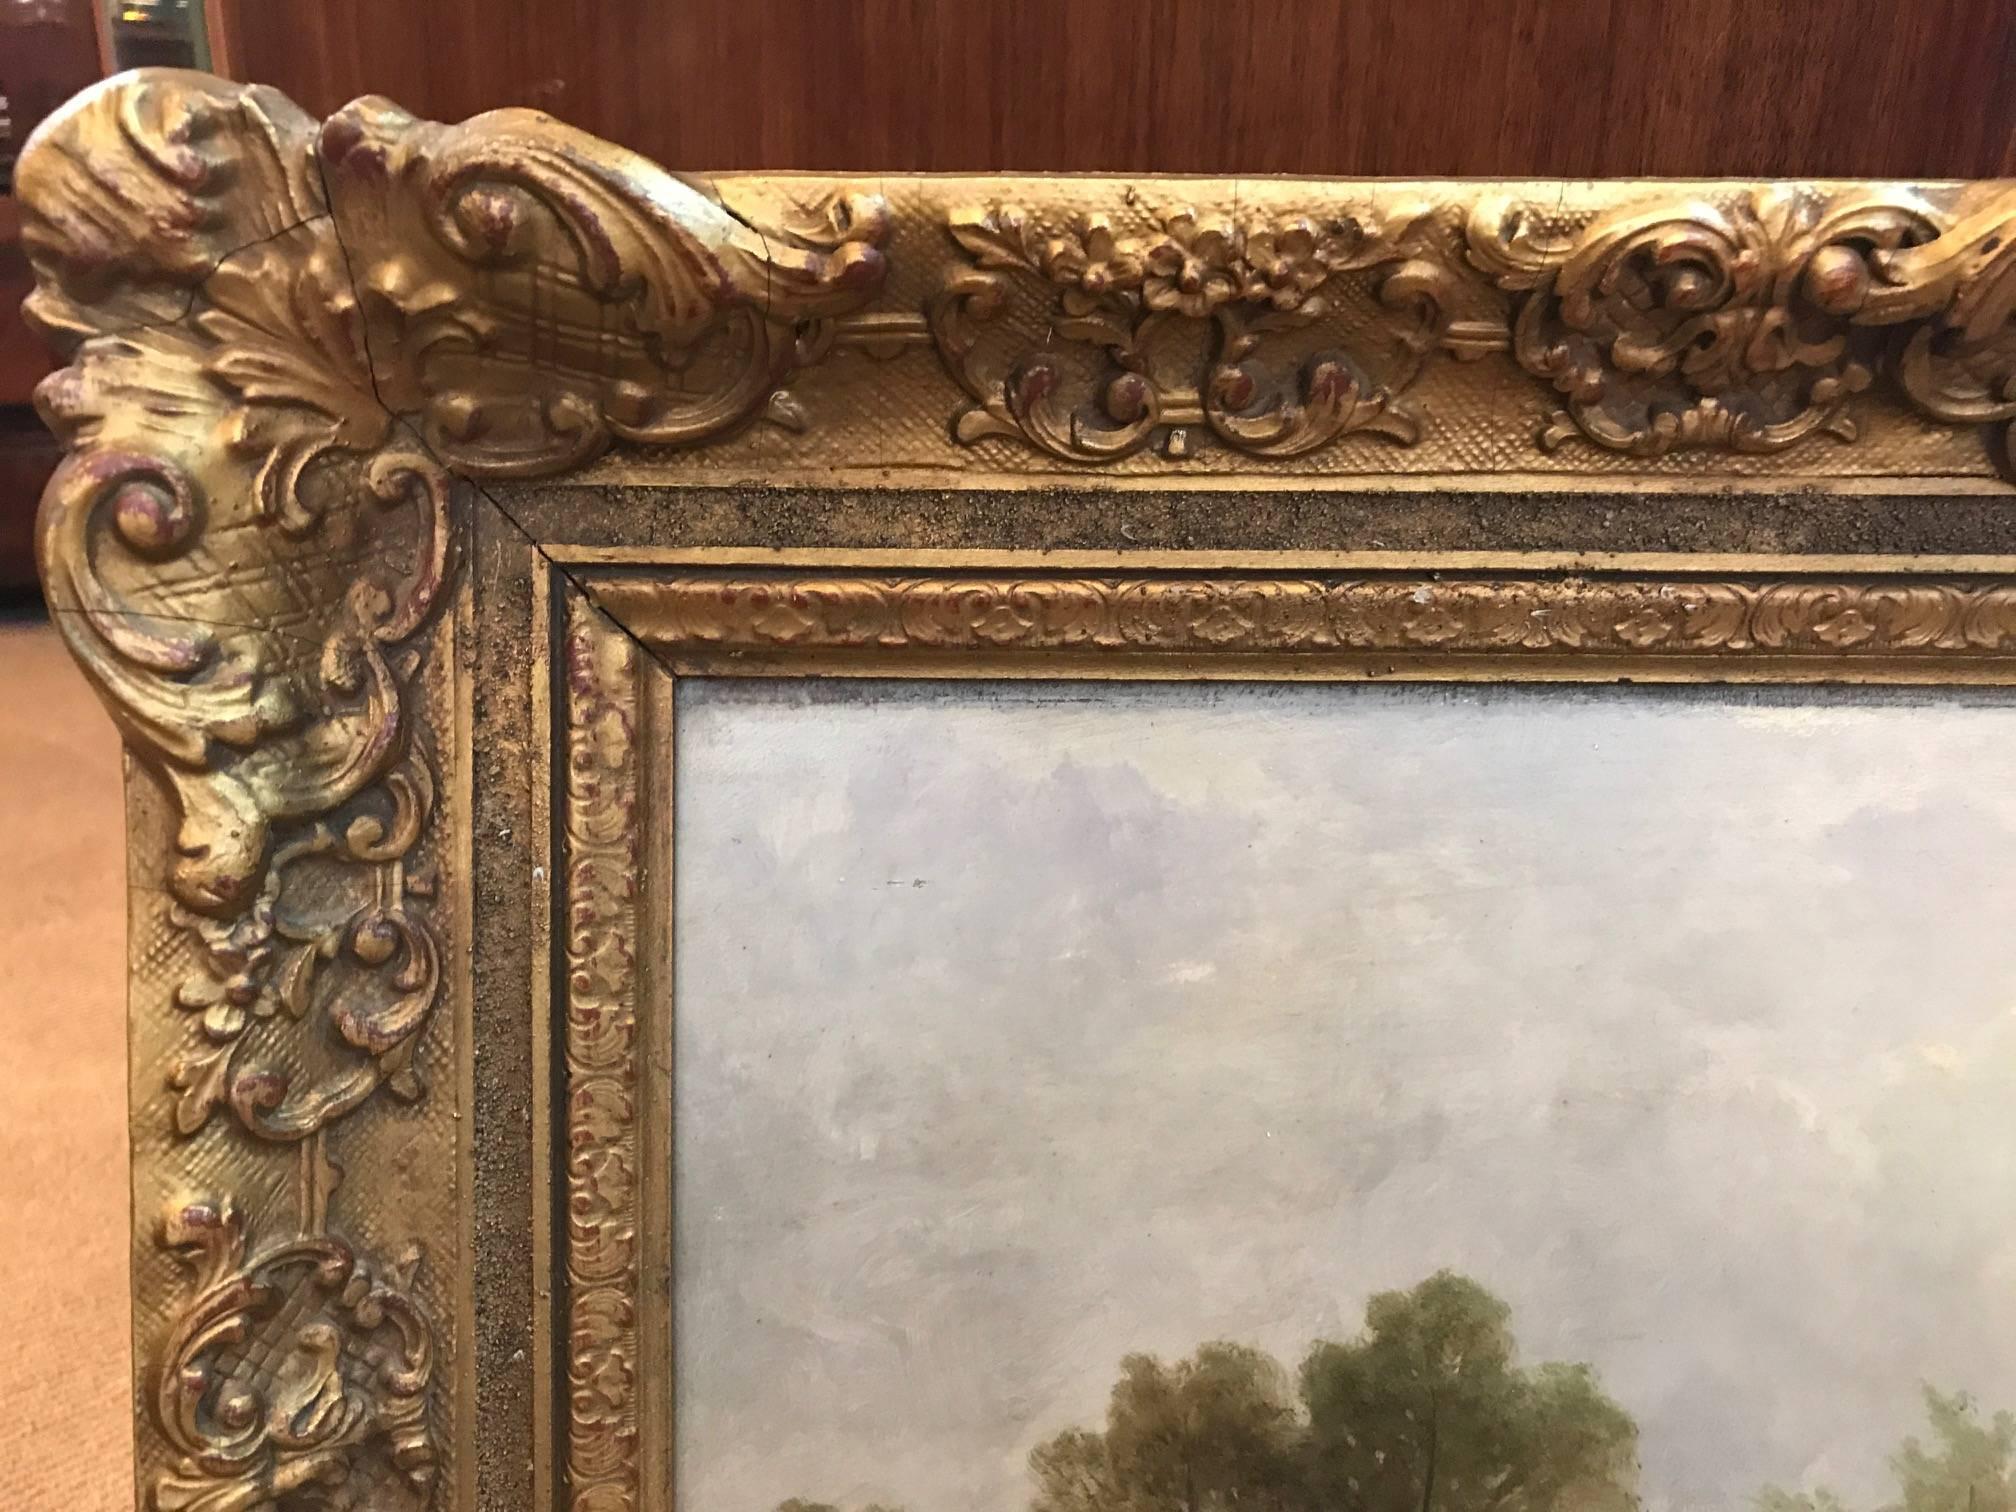 Hand-Painted Antique Landscape Oil Painting on Board in Giltwood Frame, Signed by the Artist